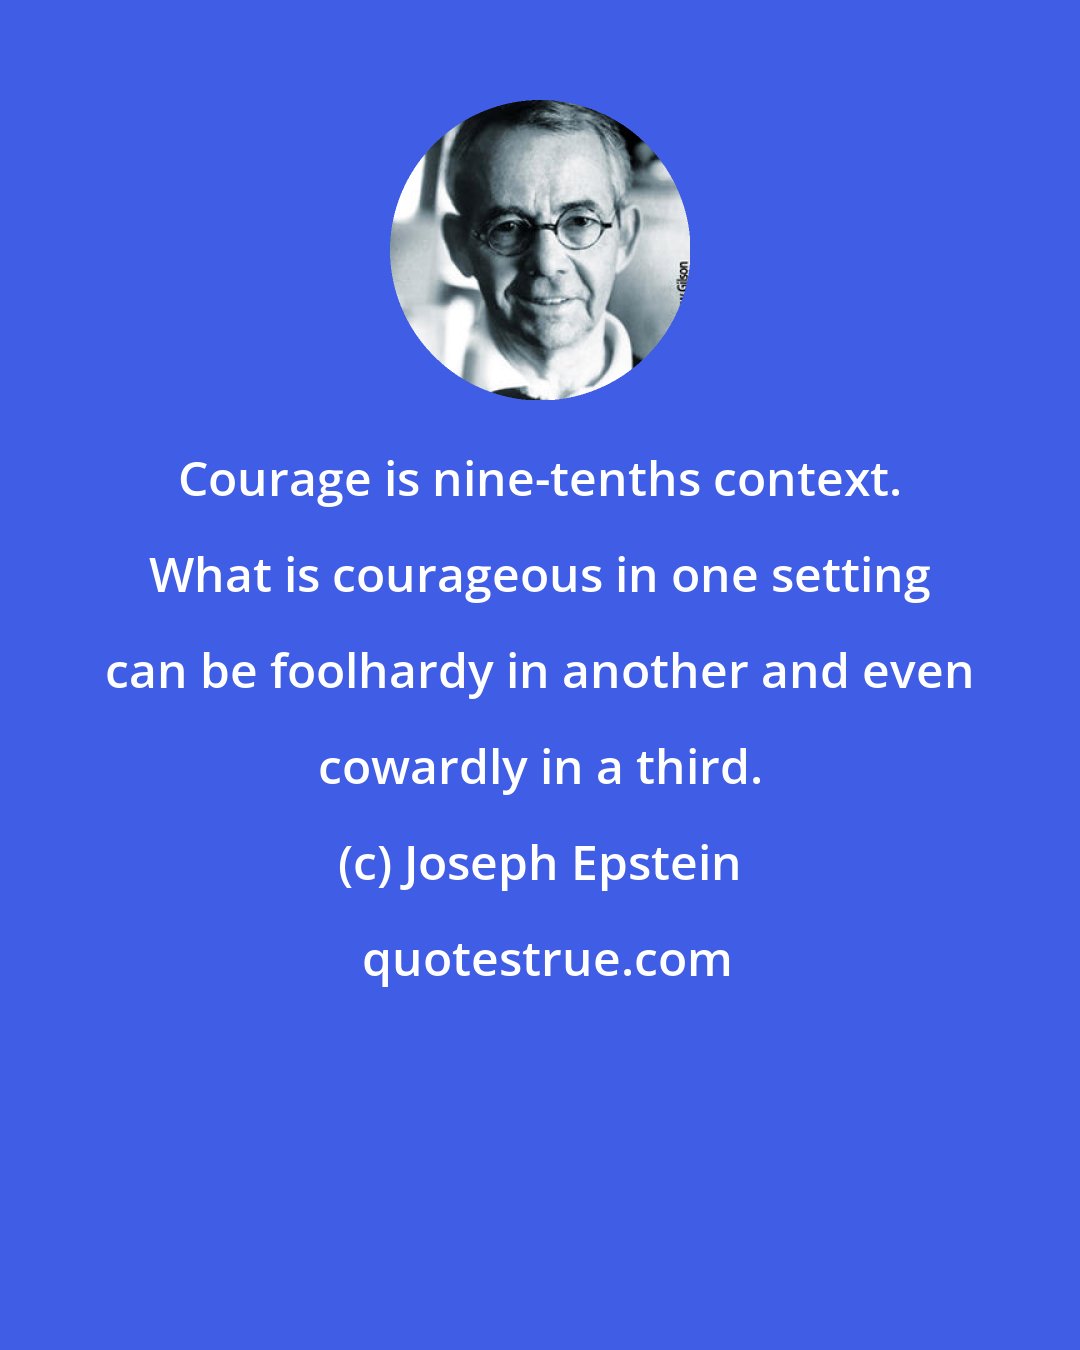 Joseph Epstein: Courage is nine-tenths context. What is courageous in one setting can be foolhardy in another and even cowardly in a third.